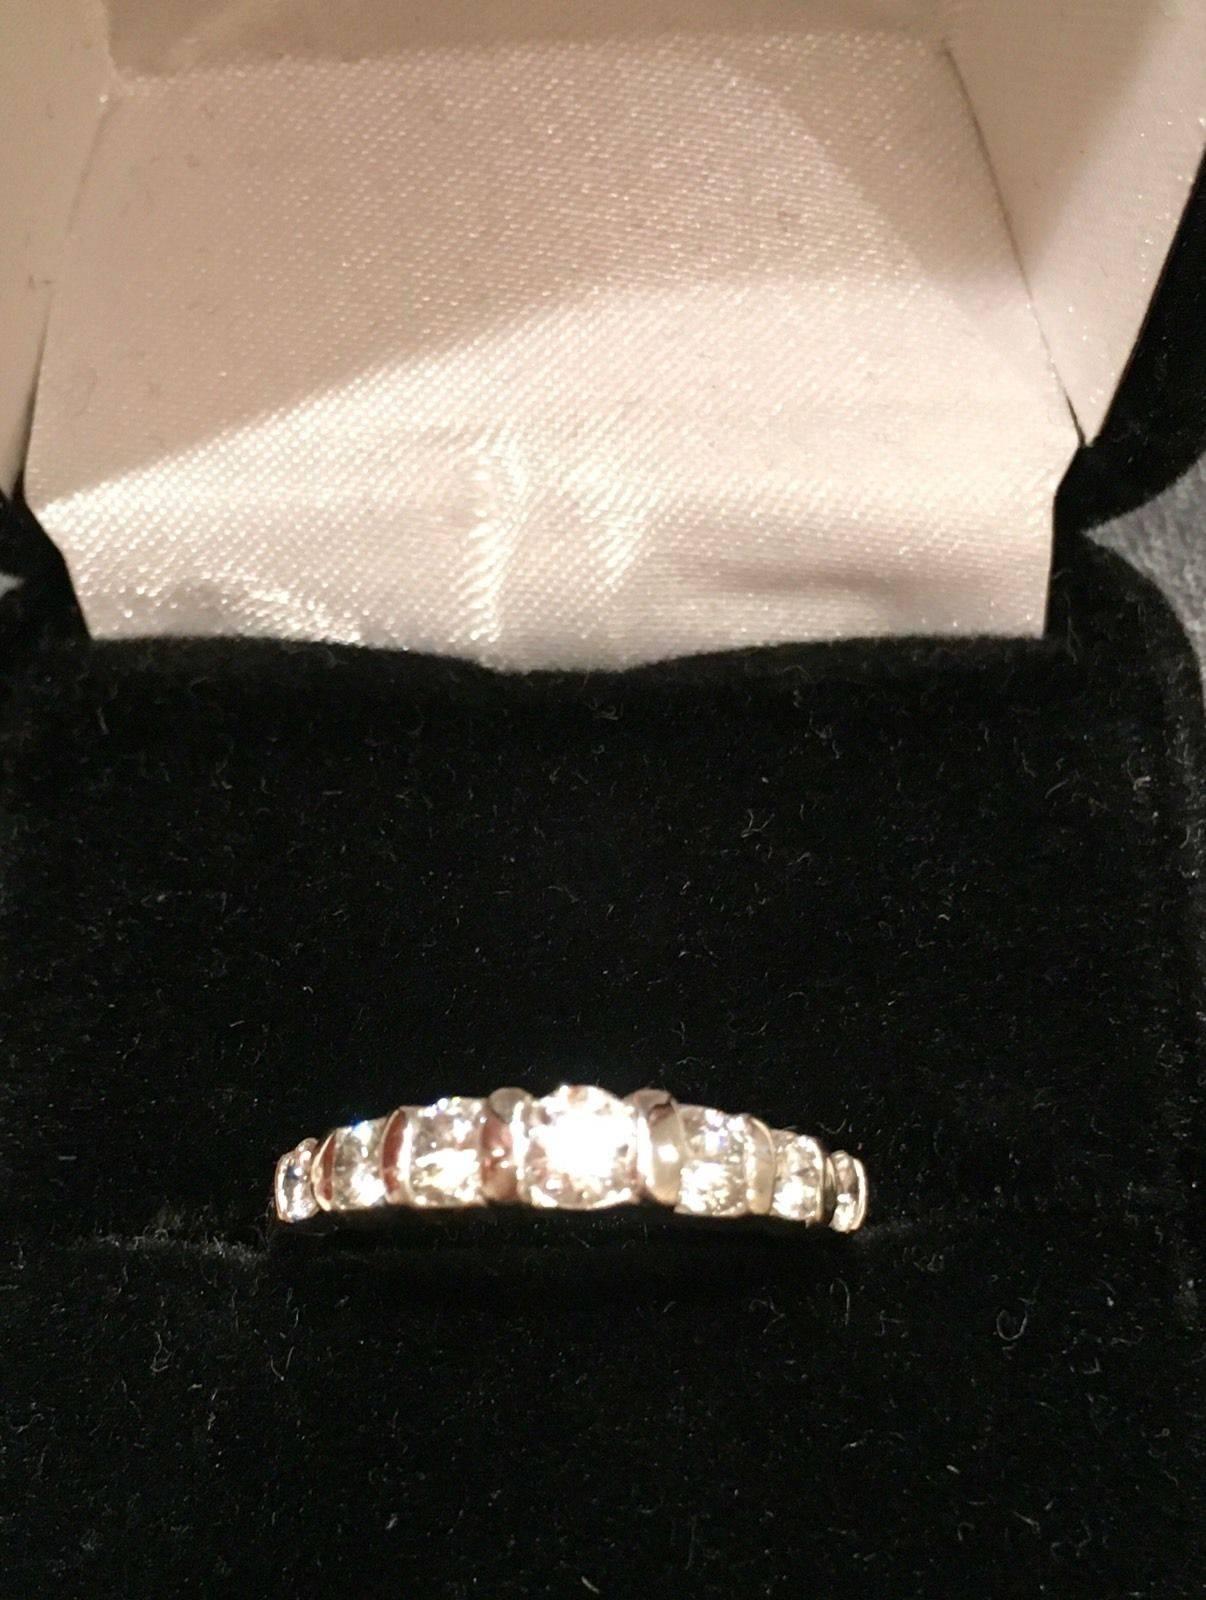 Vintage 1980s estate anniversary wedding band set with 0.80 carats of G/H VS brilliant cut round diamonds. The diamonds increase in size to the middle diamodn.  Two of these bands are available for purchase.  Estate wedding band procured from a